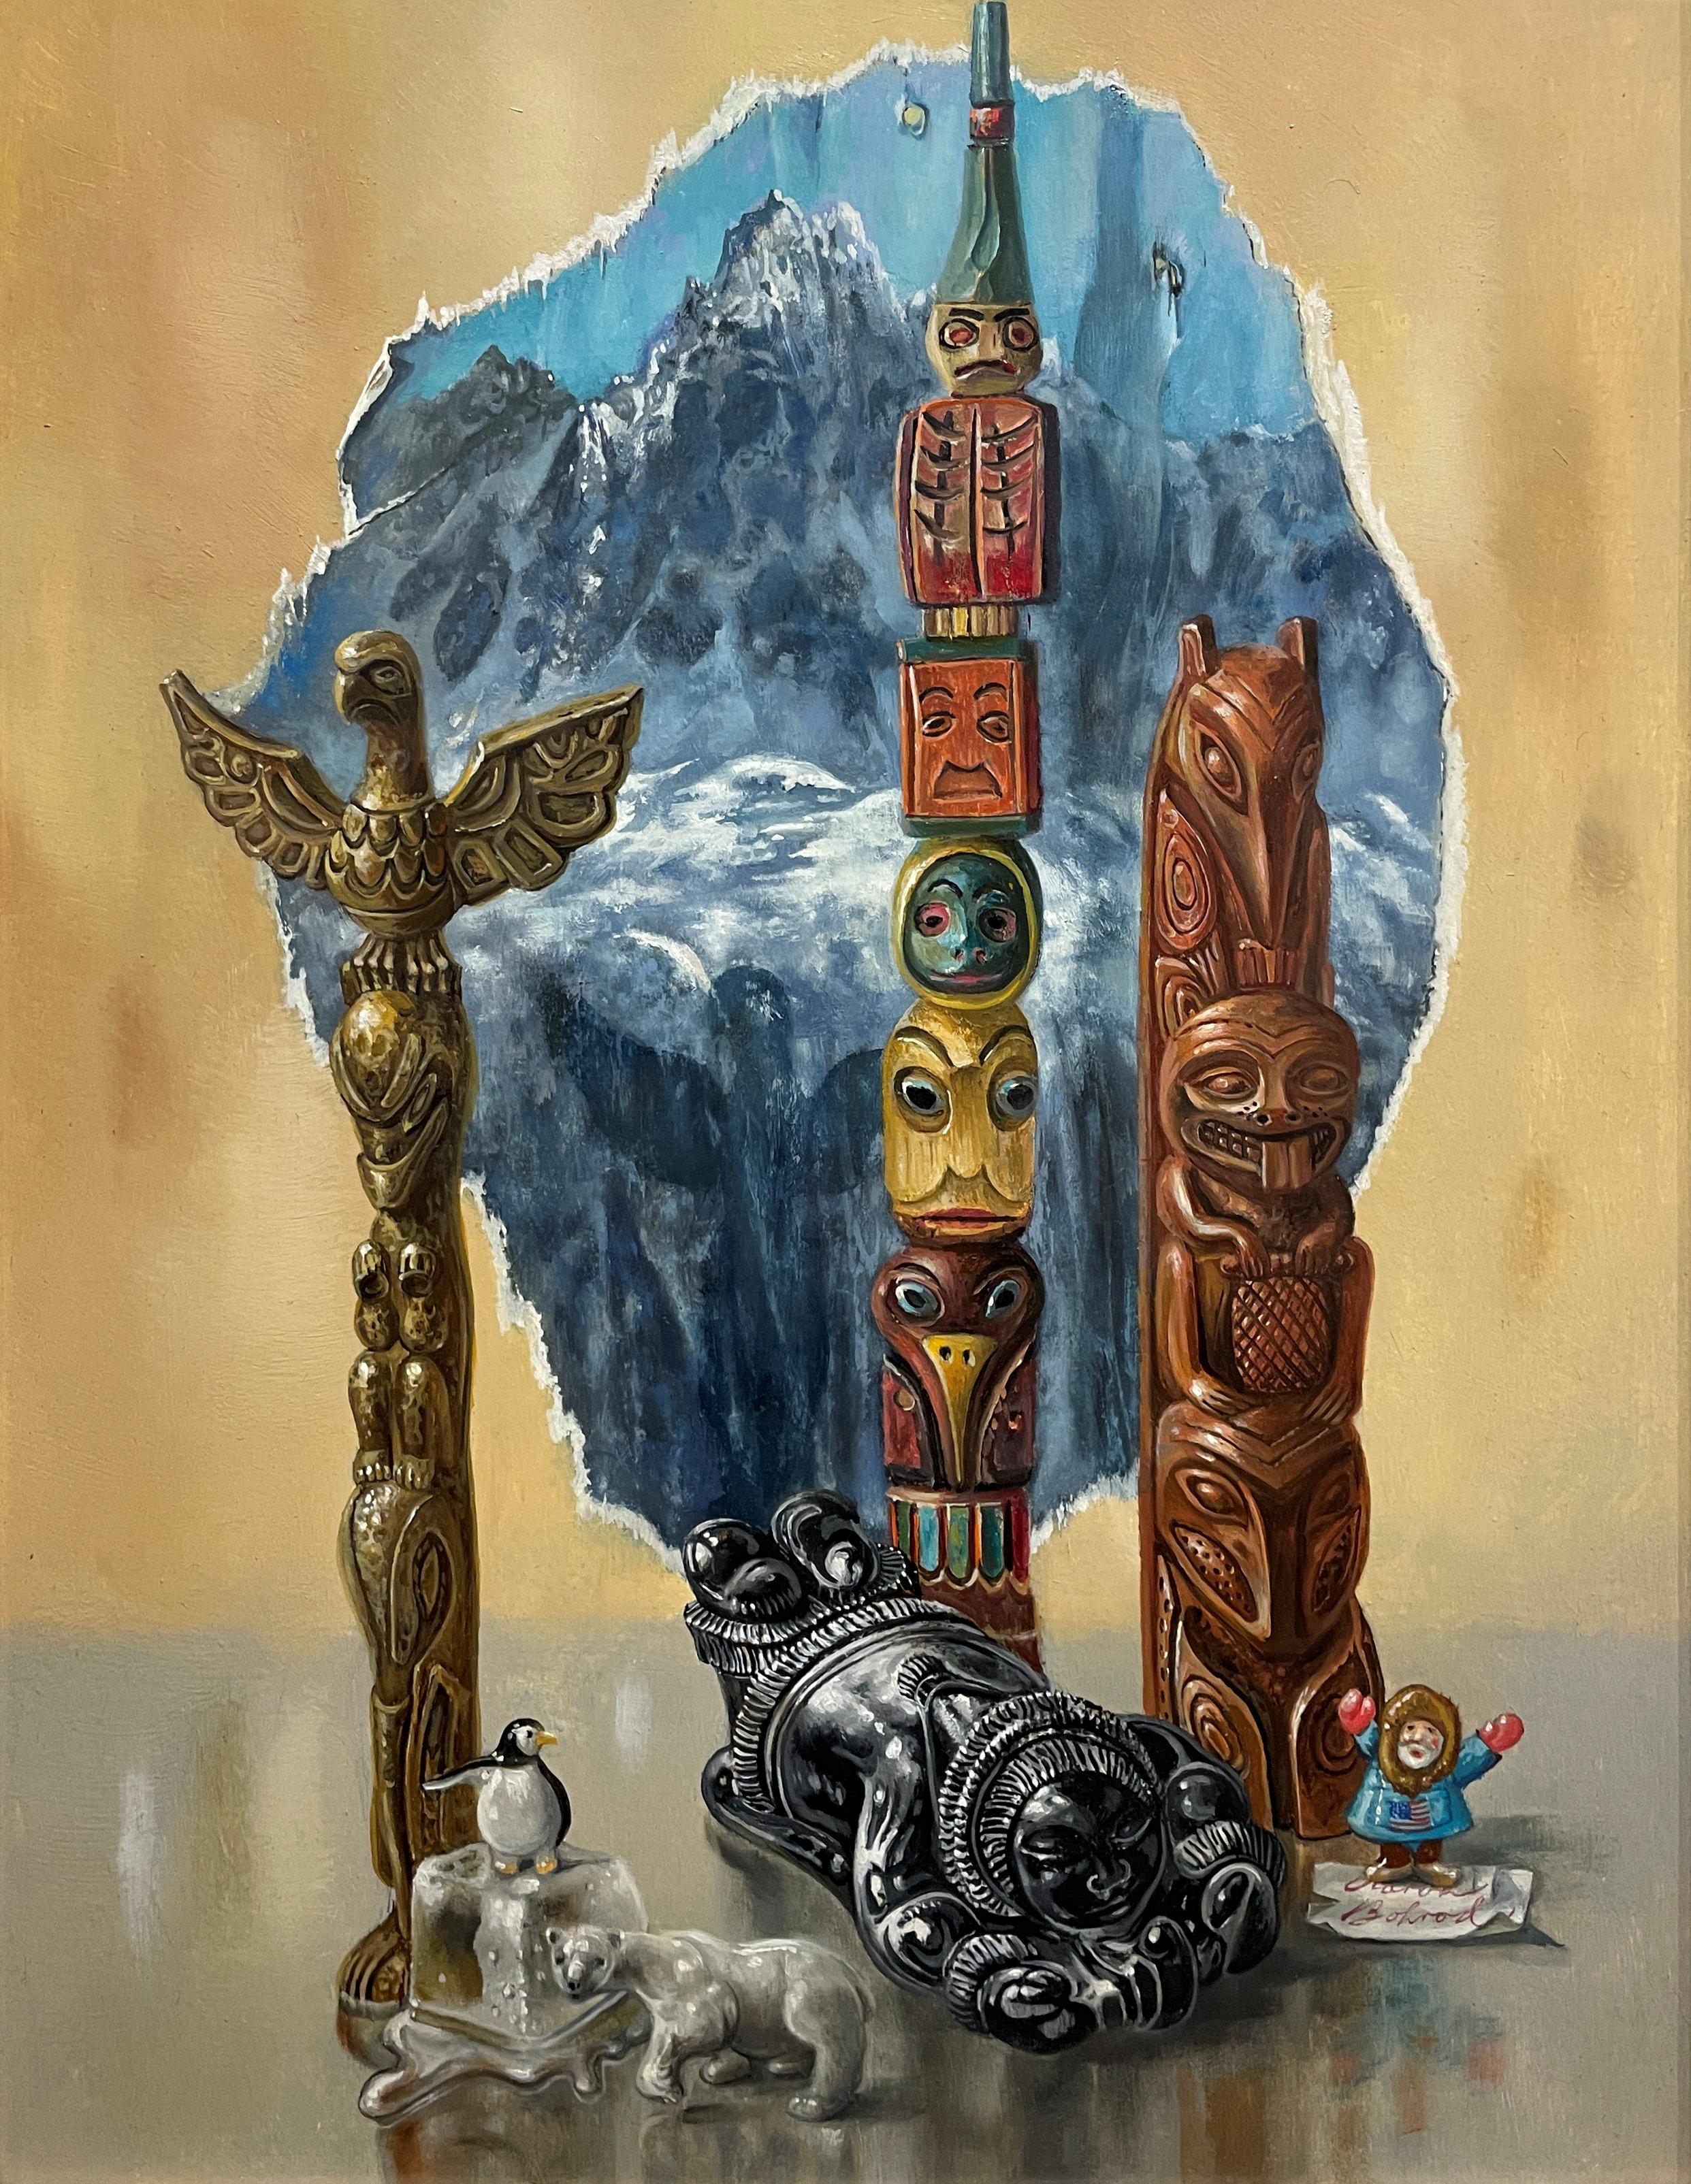 Aaron Bohrod
Objets D'Arctic, 1987
Signed lower right
Oil on gesso board
14 x 11 inches

Aaron Bohrod's work has not been limited to one style or medium. Initially recognized as a regionalist painter of American scenes, particularly of his native